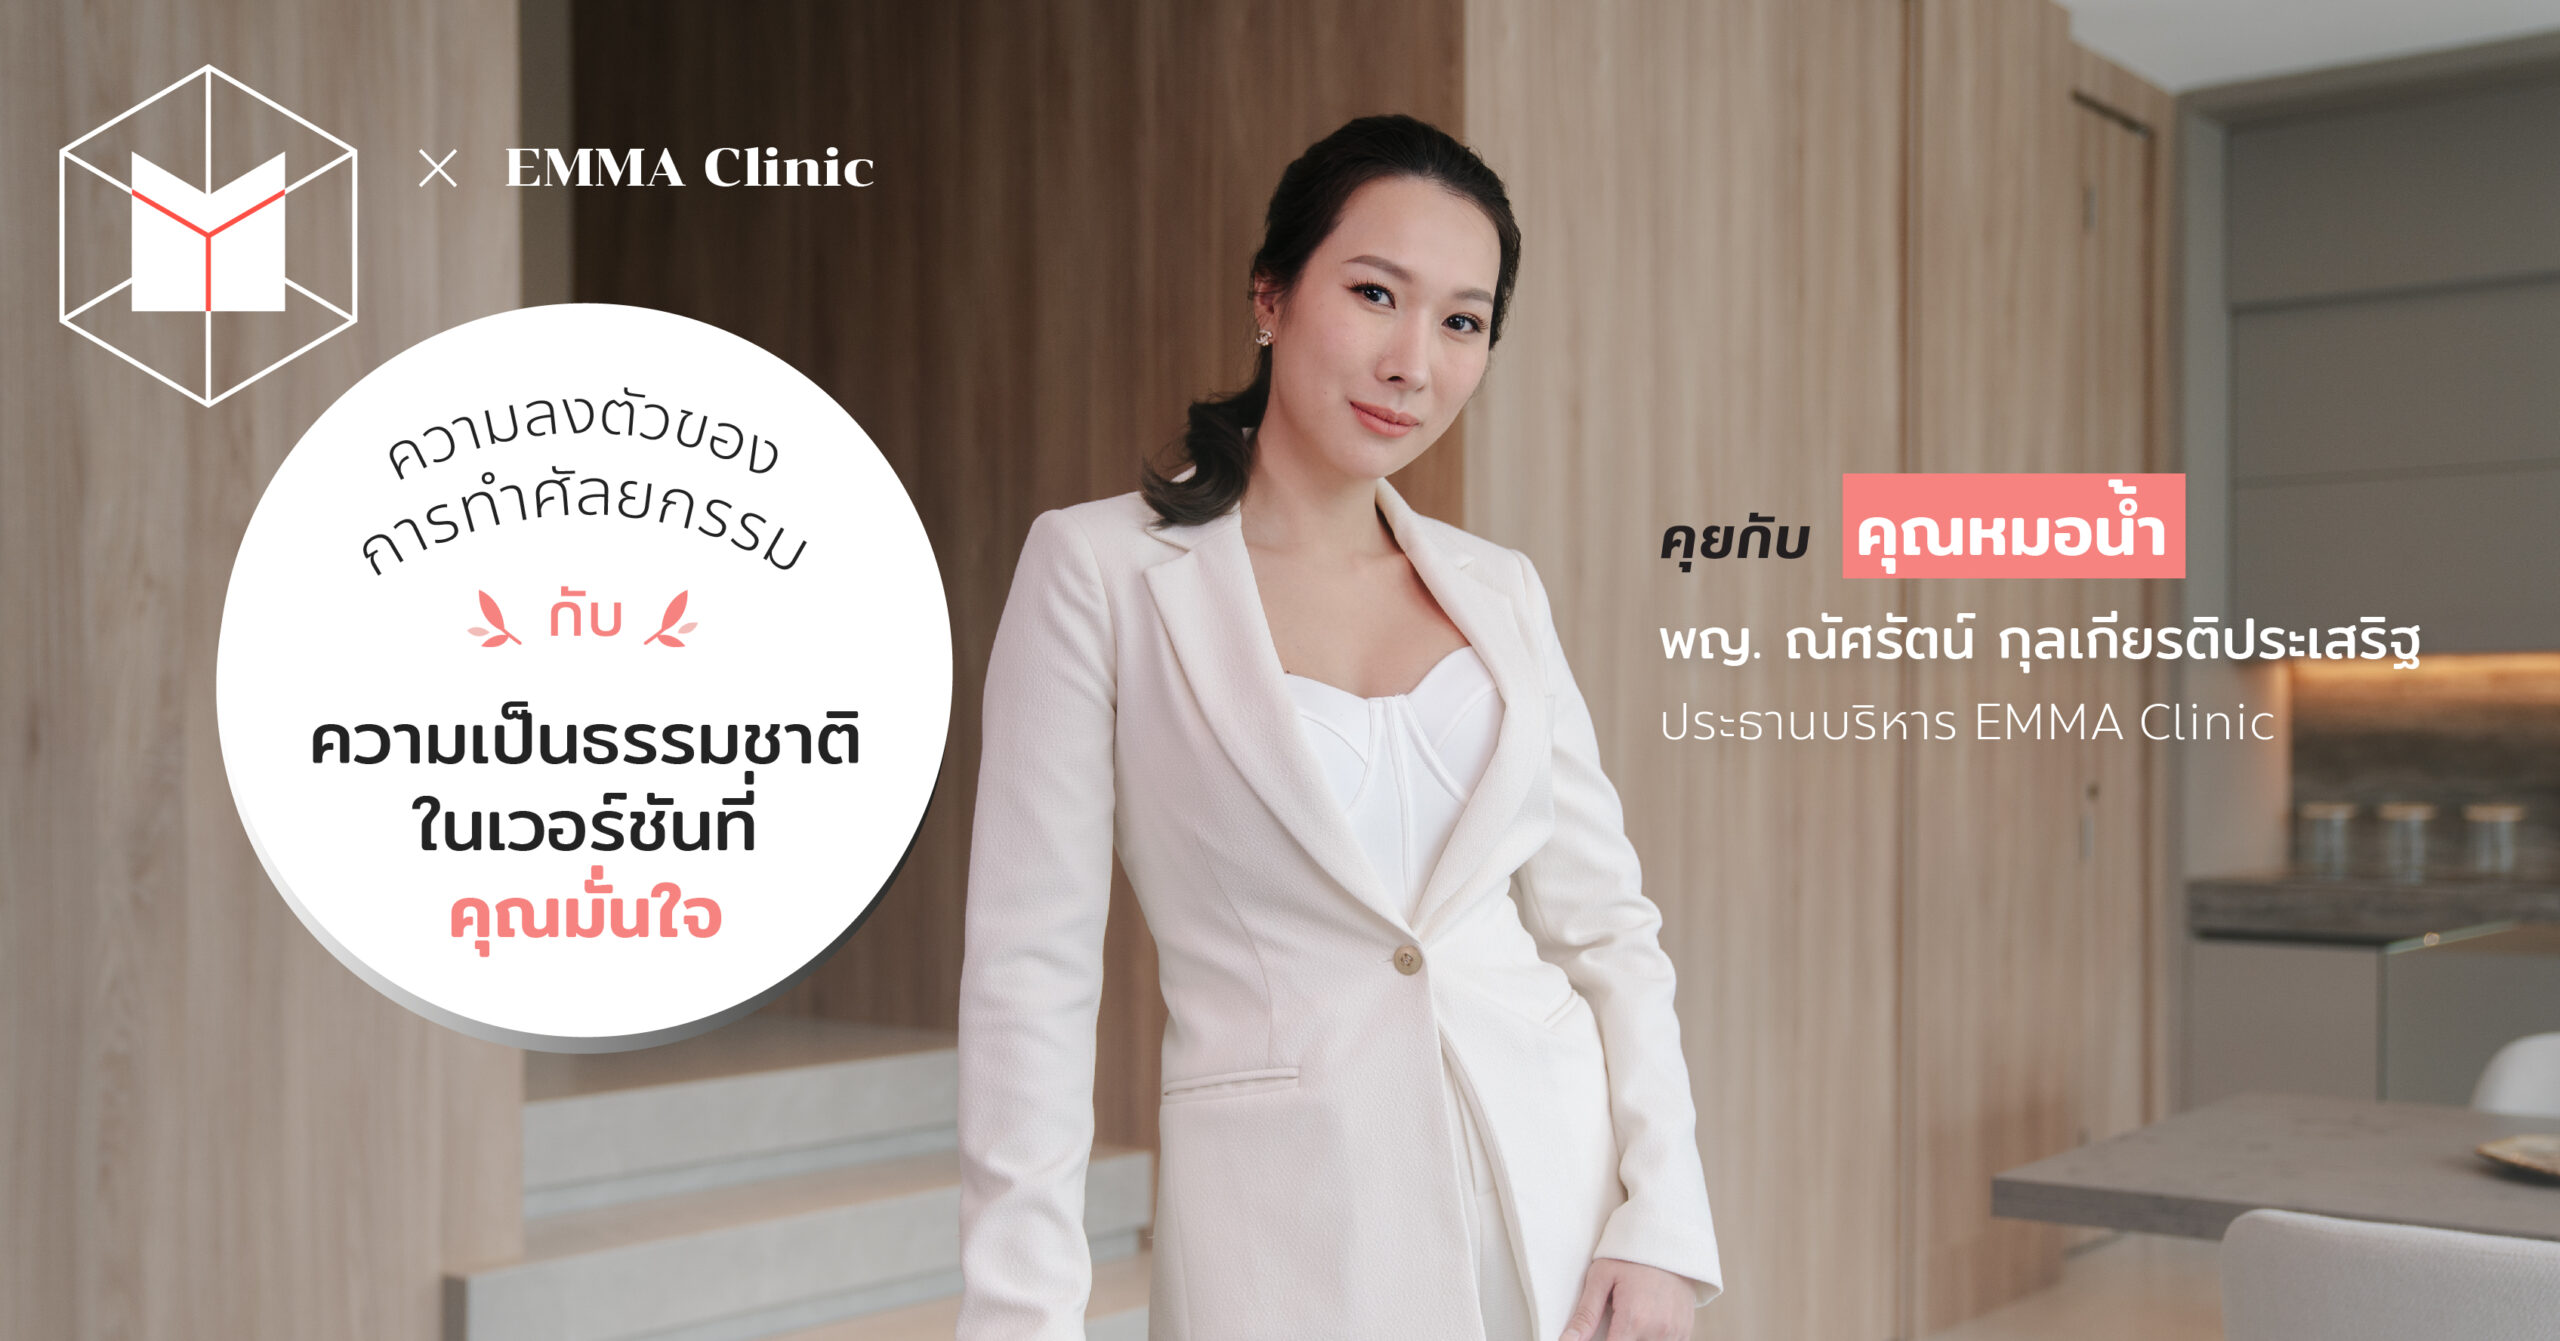 Ready go to ... https://thematter.co/brandedcontent/emma-clinic_reveal-your-beauty/185882 [ à¸à¸§à¸²à¸¡à¸¥à¸à¸à¸±à¸§à¸à¸­à¸à¸à¸²à¸£à¸à¸³à¸¨à¸±à¸¥à¸¢à¸à¸£à¸£à¸¡à¸à¸±à¸à¸à¸§à¸²à¸¡à¹à¸à¹à¸à¸à¸£à¸£à¸¡à¸à¸²à¸à¸´à¹à¸à¹à¸§à¸­à¸£à¹à¸à¸±à¹à¸à¸à¸µà¹à¸à¸¸à¸à¸¡à¸±à¹à¸à¹à¸ à¸à¸¸à¸¢à¸à¸±à¸ à¸à¸¸à¸à¸«à¸¡à¸­à¸à¹à¸³ à¸à¸. à¸à¸±à¸¨à¸£à¸±à¸à¸à¹ à¸à¸¸à¸¥à¹à¸à¸µà¸¢à¸£à¸à¸´à¸à¸£à¸°à¹à¸ªà¸£à¸´à¸ à¸à¸£à¸°à¸à¸²à¸à¸à¸£à¸´à¸«à¸²à¸£ EMMA CLINIC]